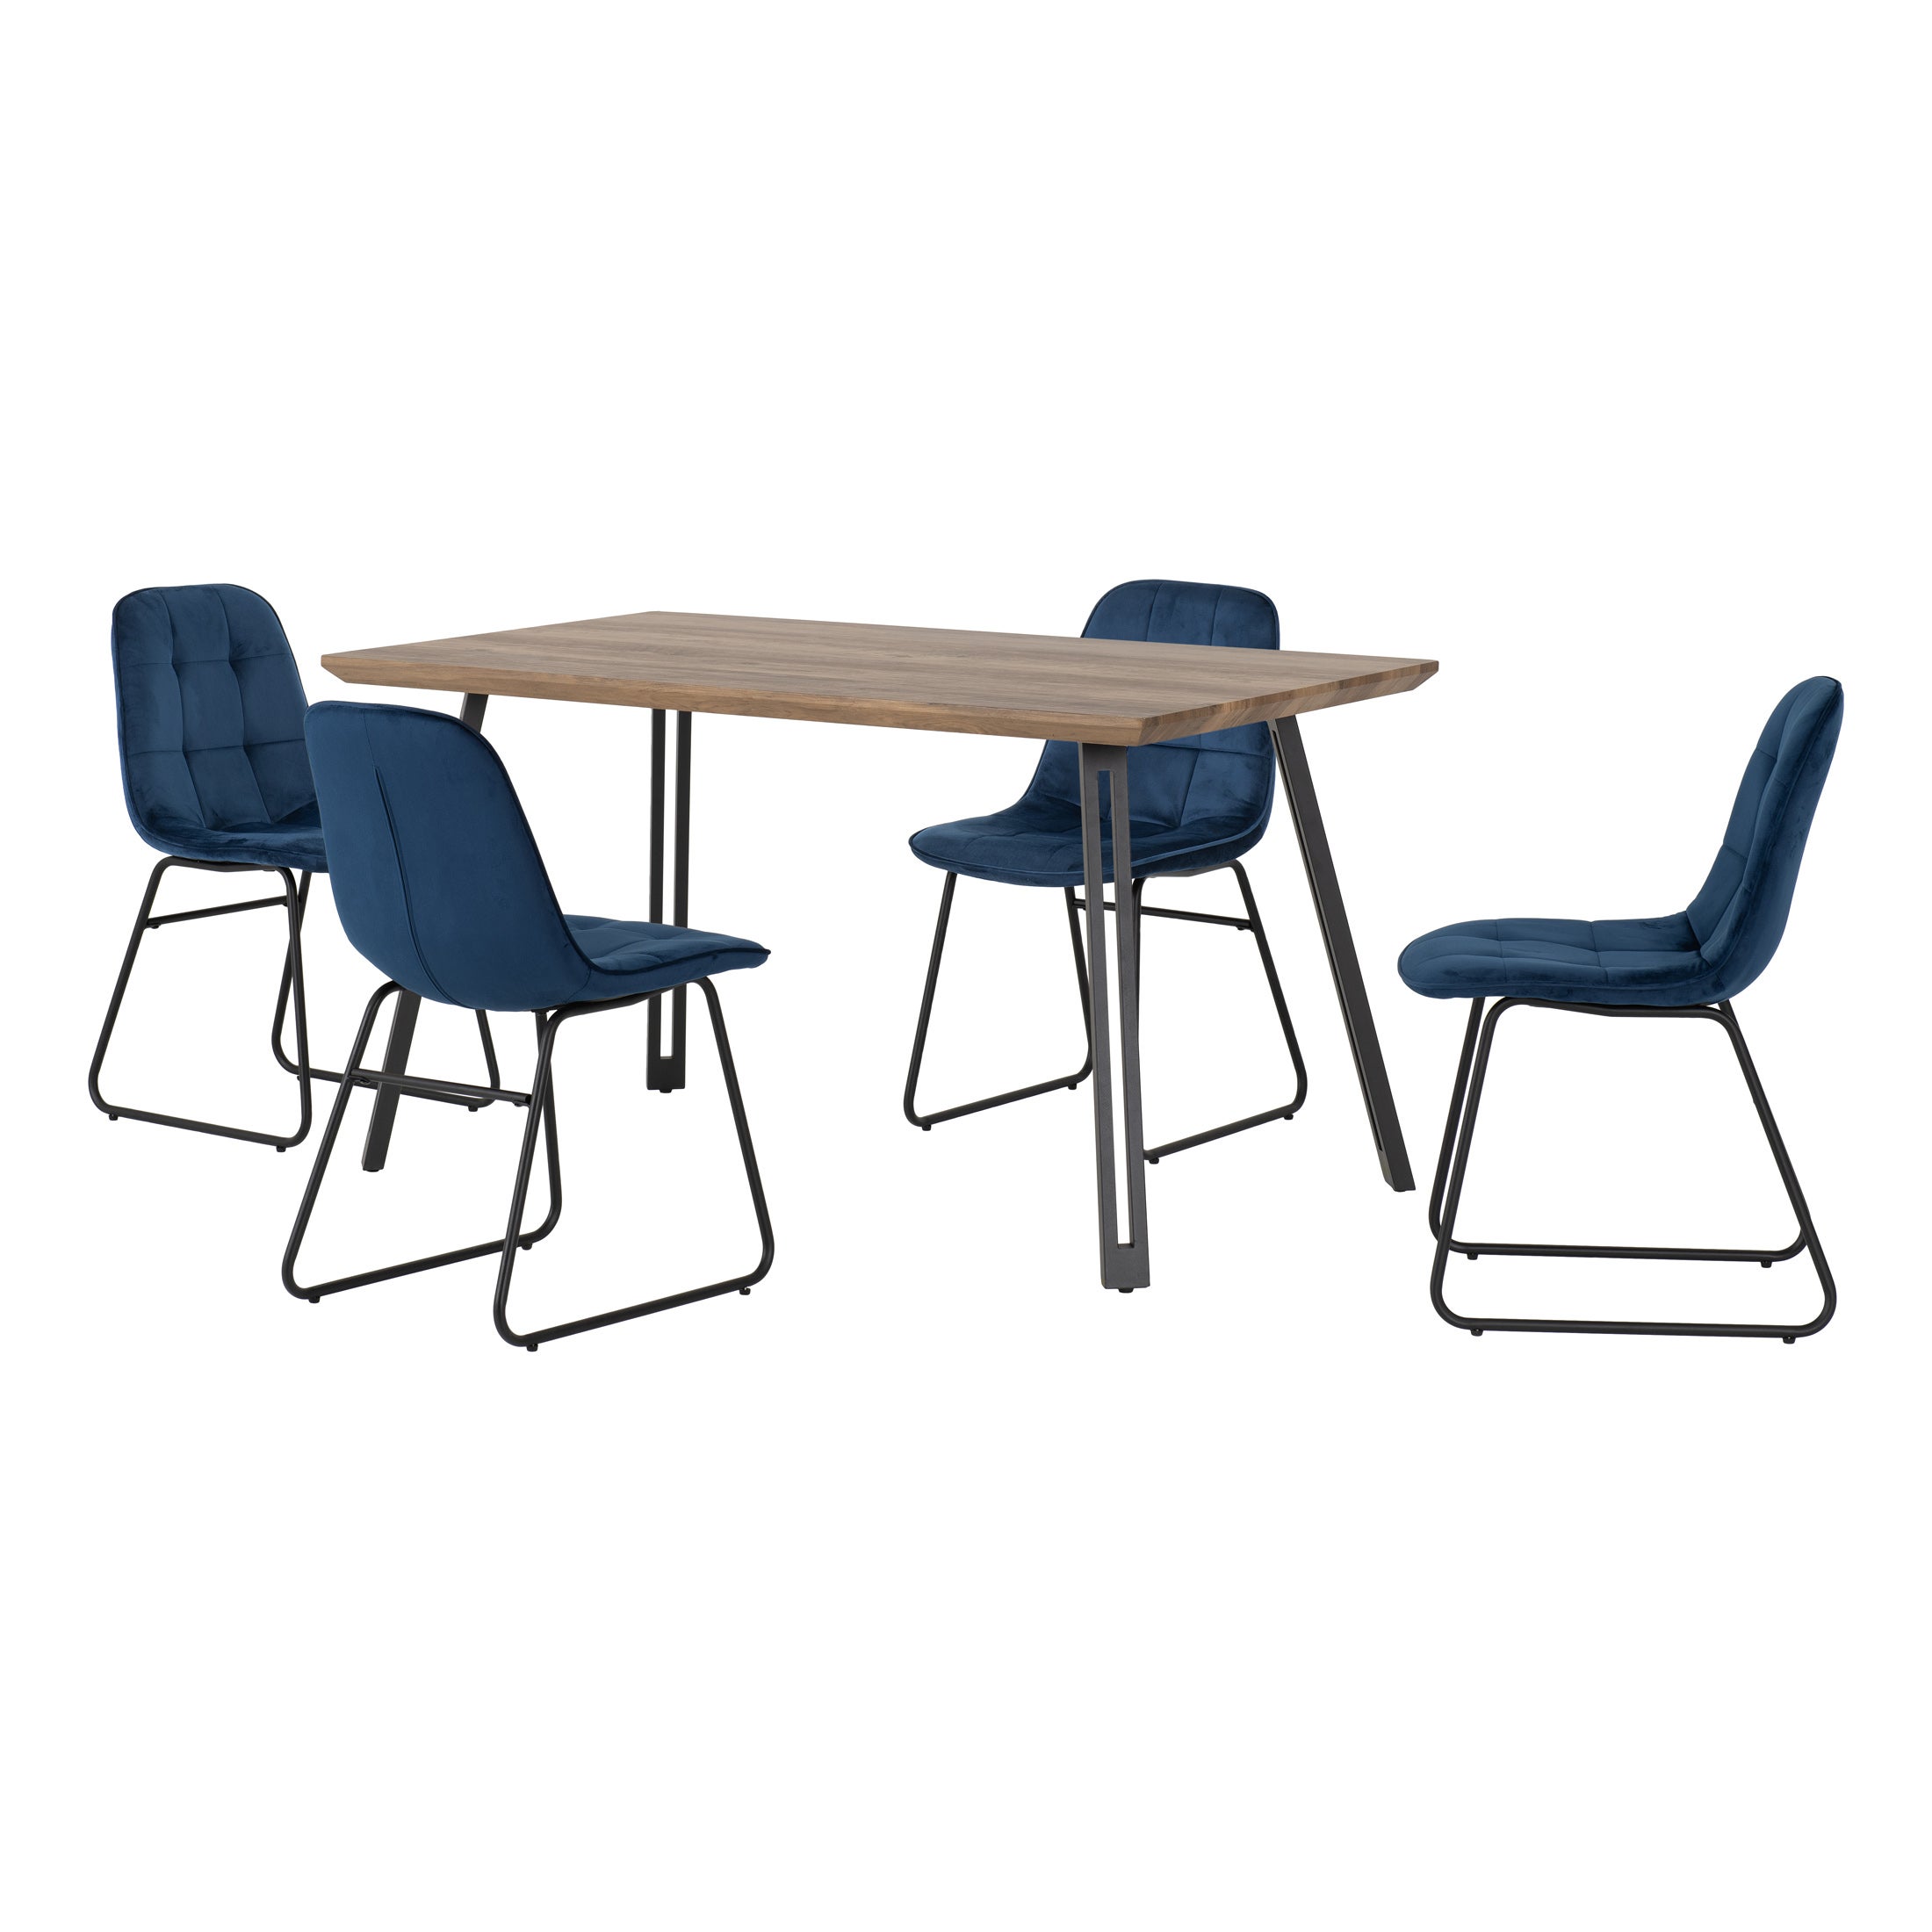 Photos - Sofa Lukas Quebec Rectangular Dining Table with 4  Chairs Navy Blue 